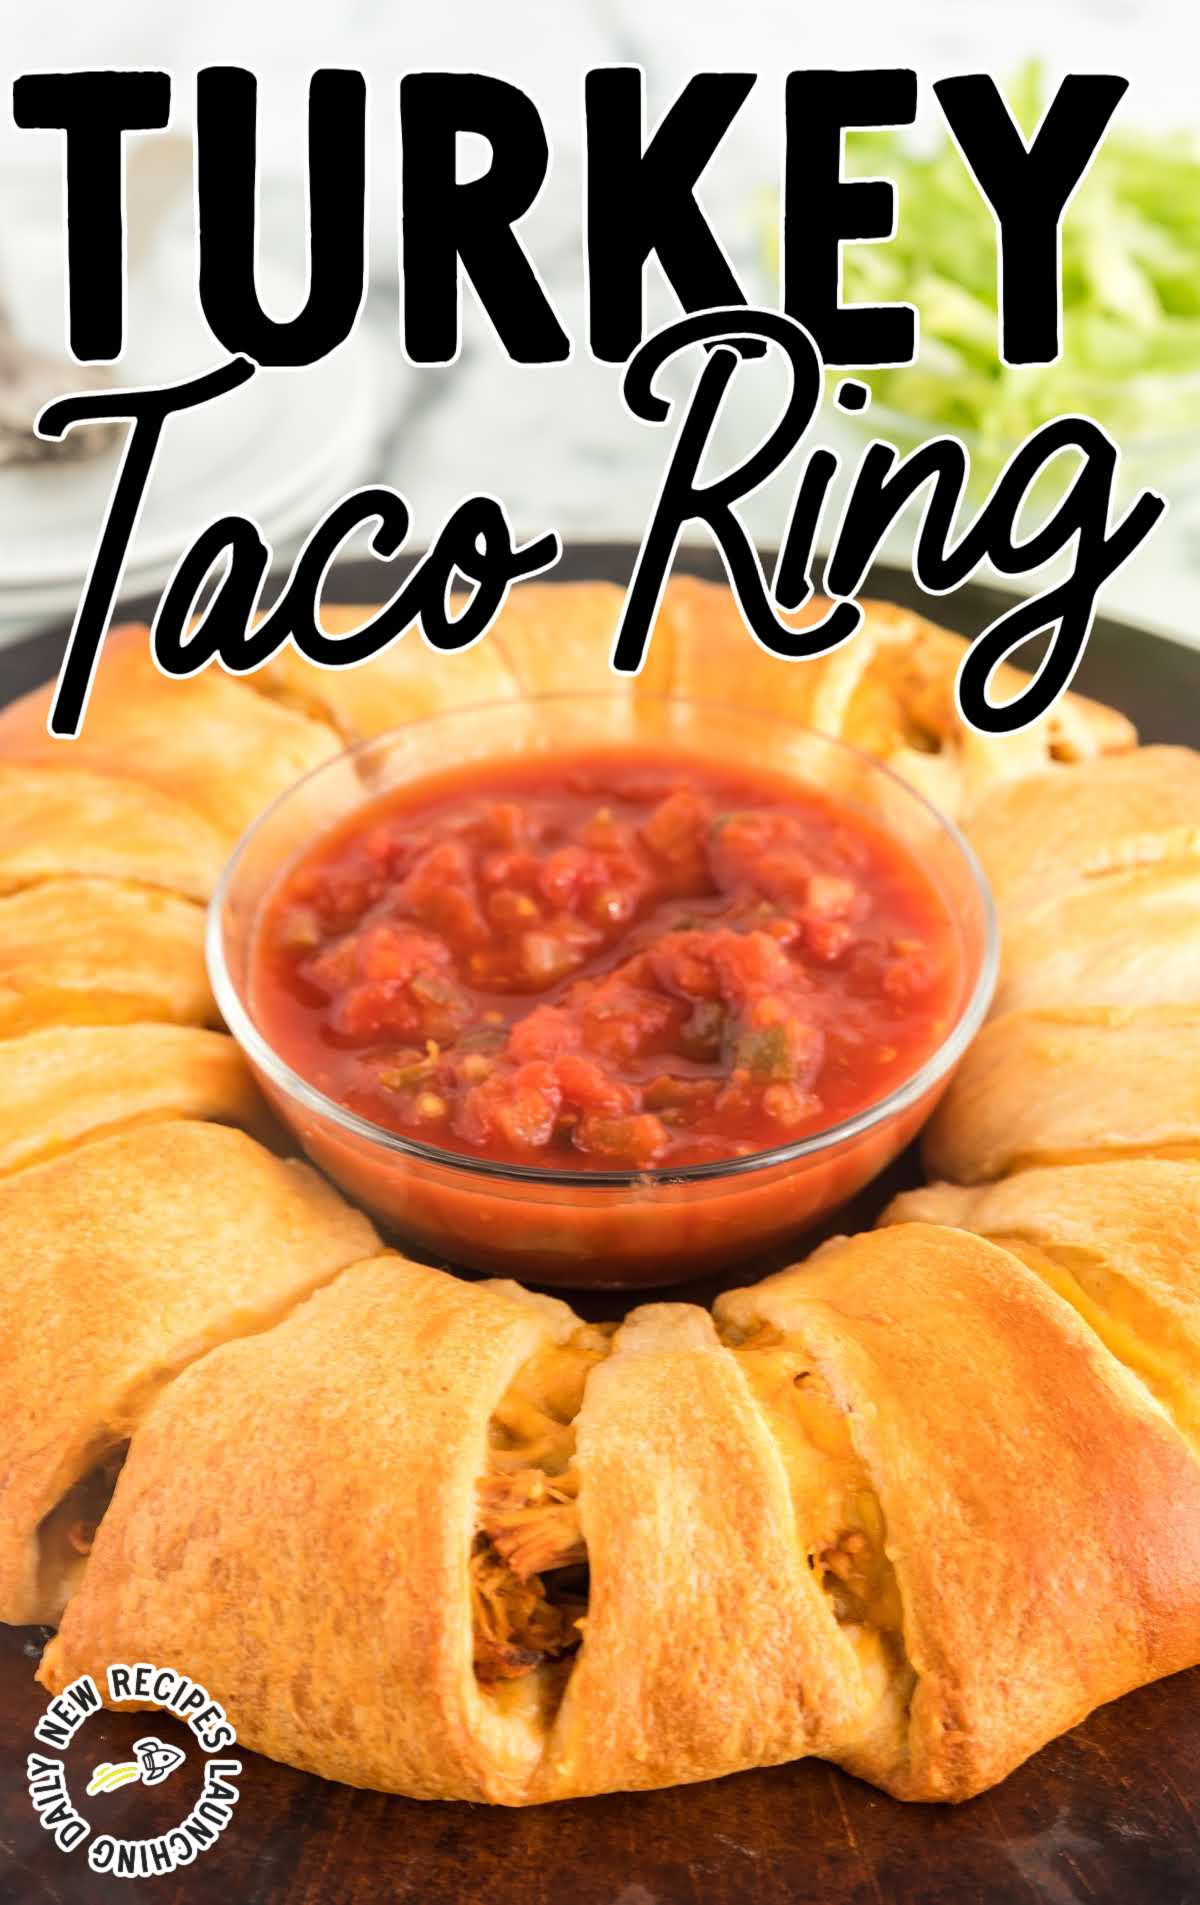 close up shot of a Turkey Taco Ring with a bowl of salsa in the middle